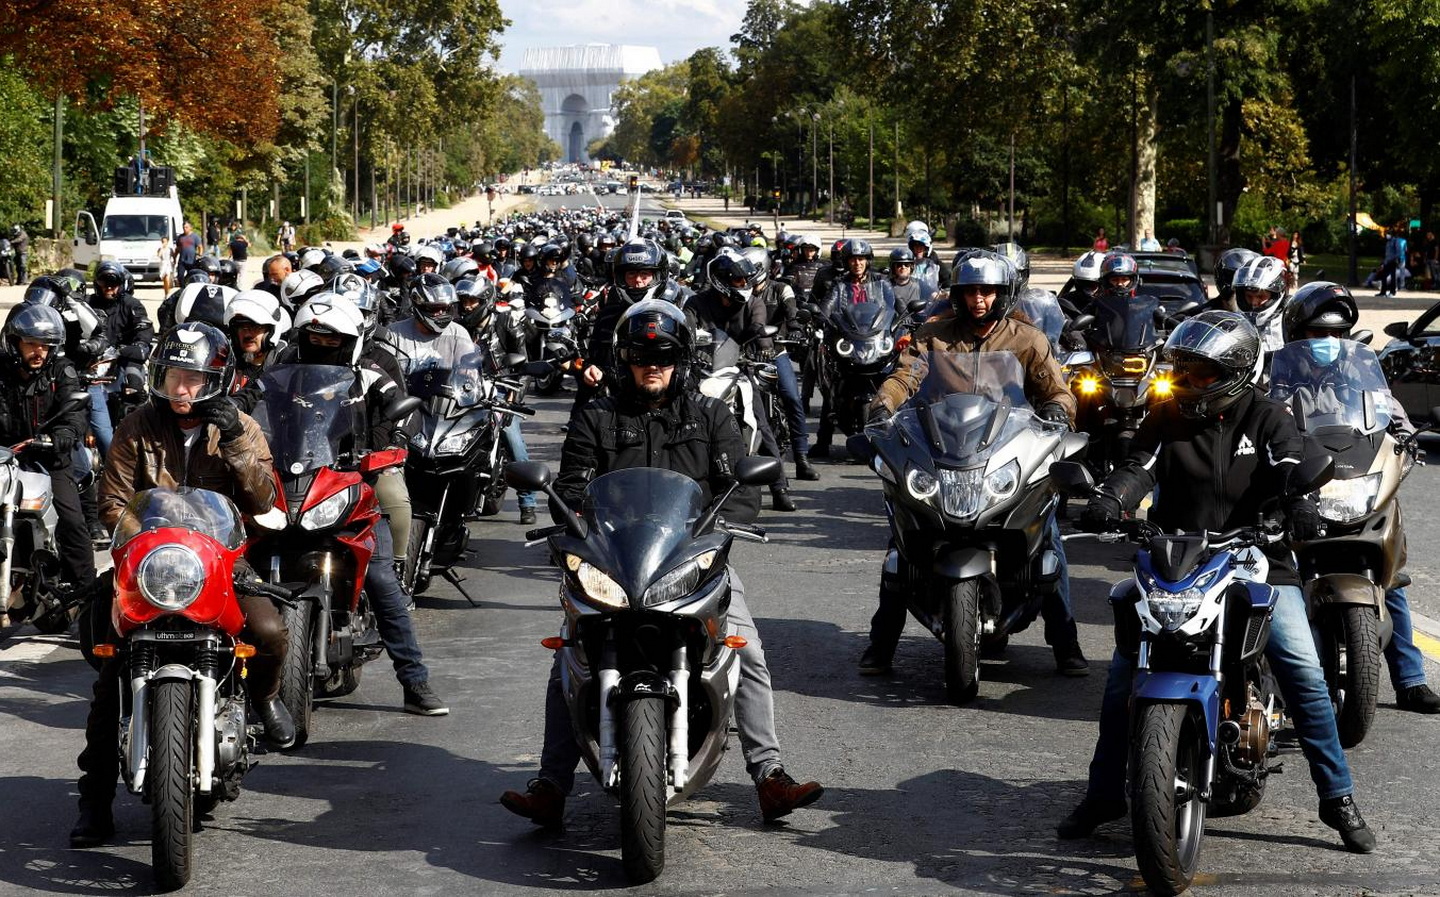 Hundreds of motorcyclists protest Paris parking charges as mayor wages war on motor vehicles